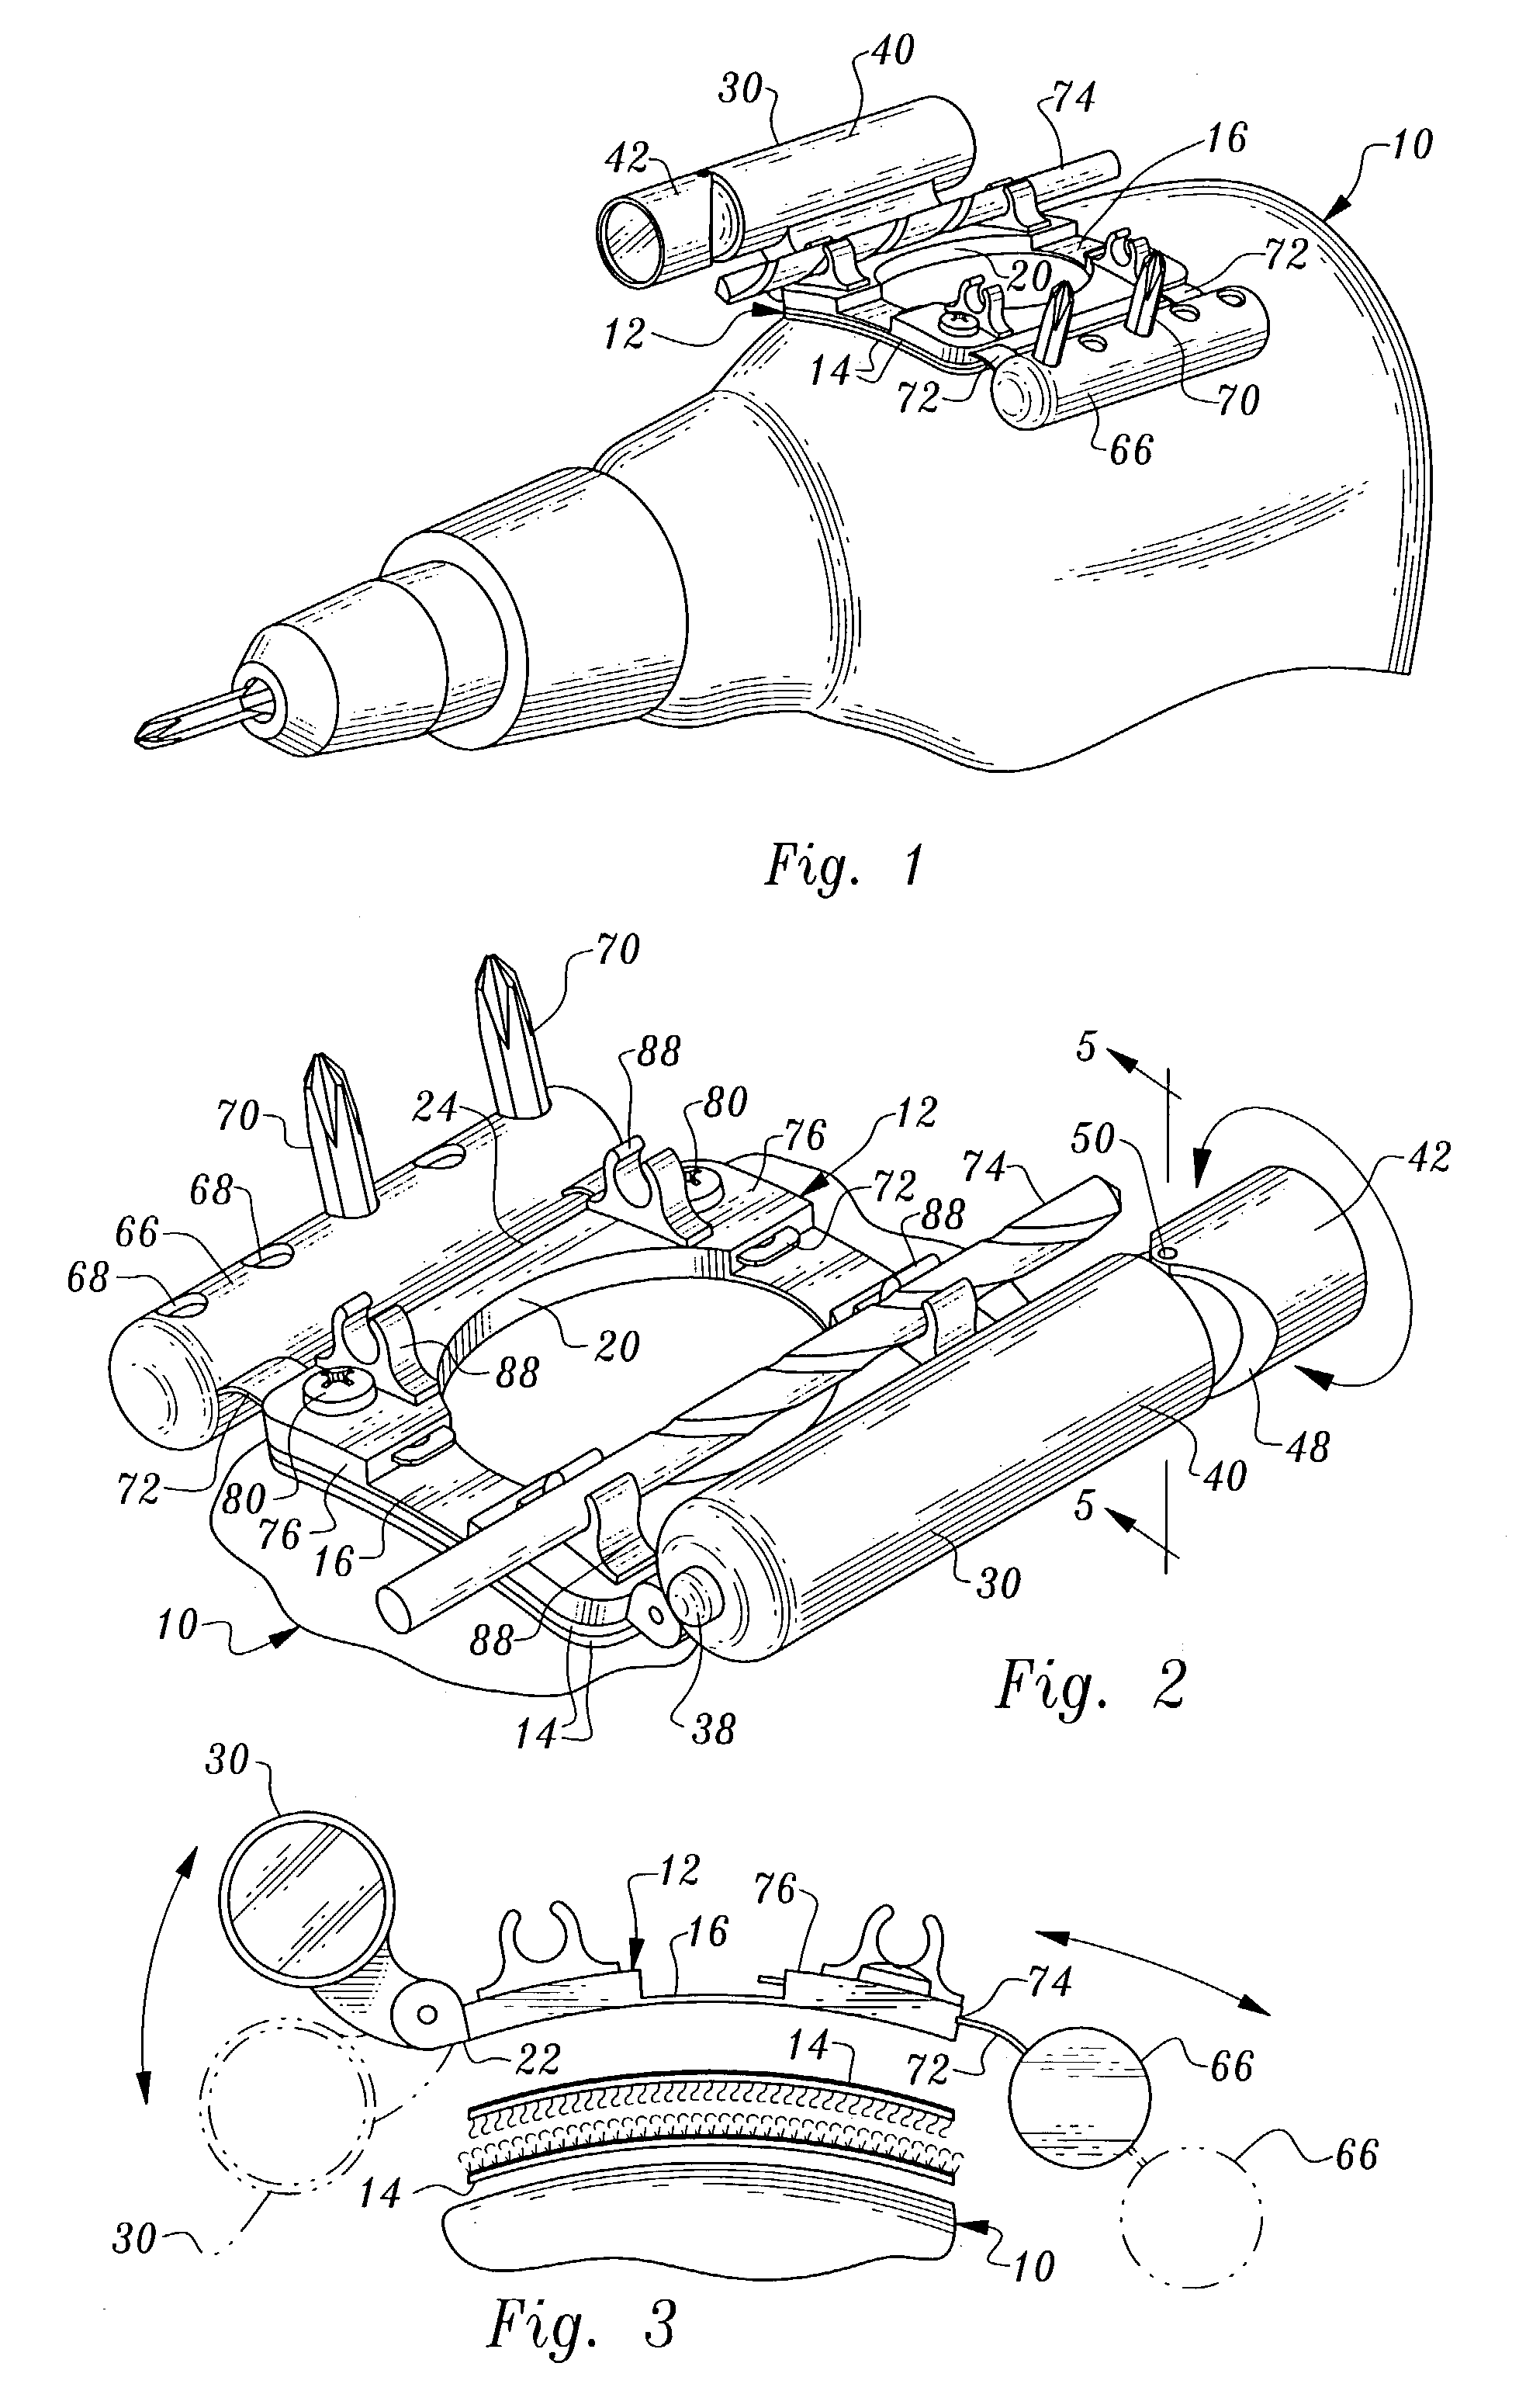 Apparatus including flash light and bit holder for attachment to an electric drill